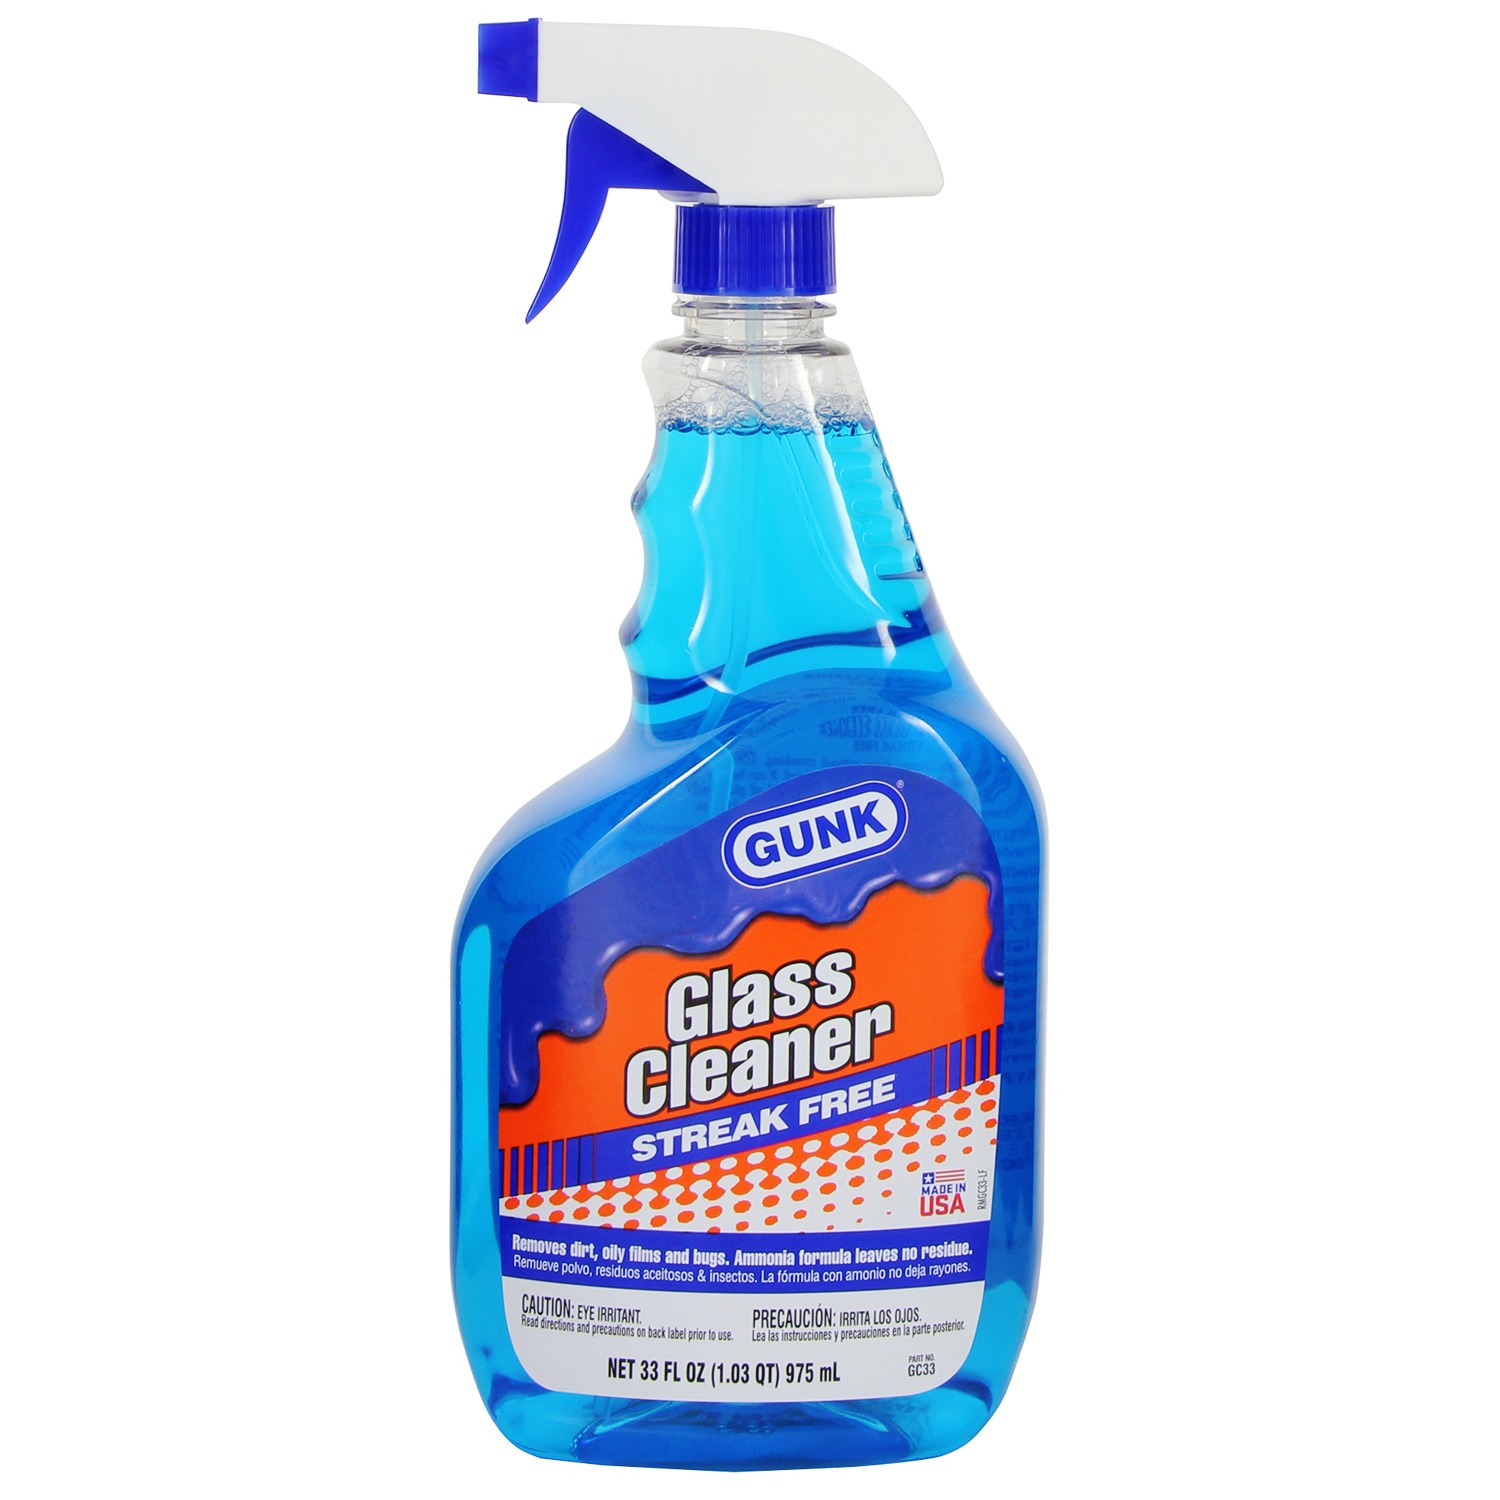 WINDSHIELD CLEANER